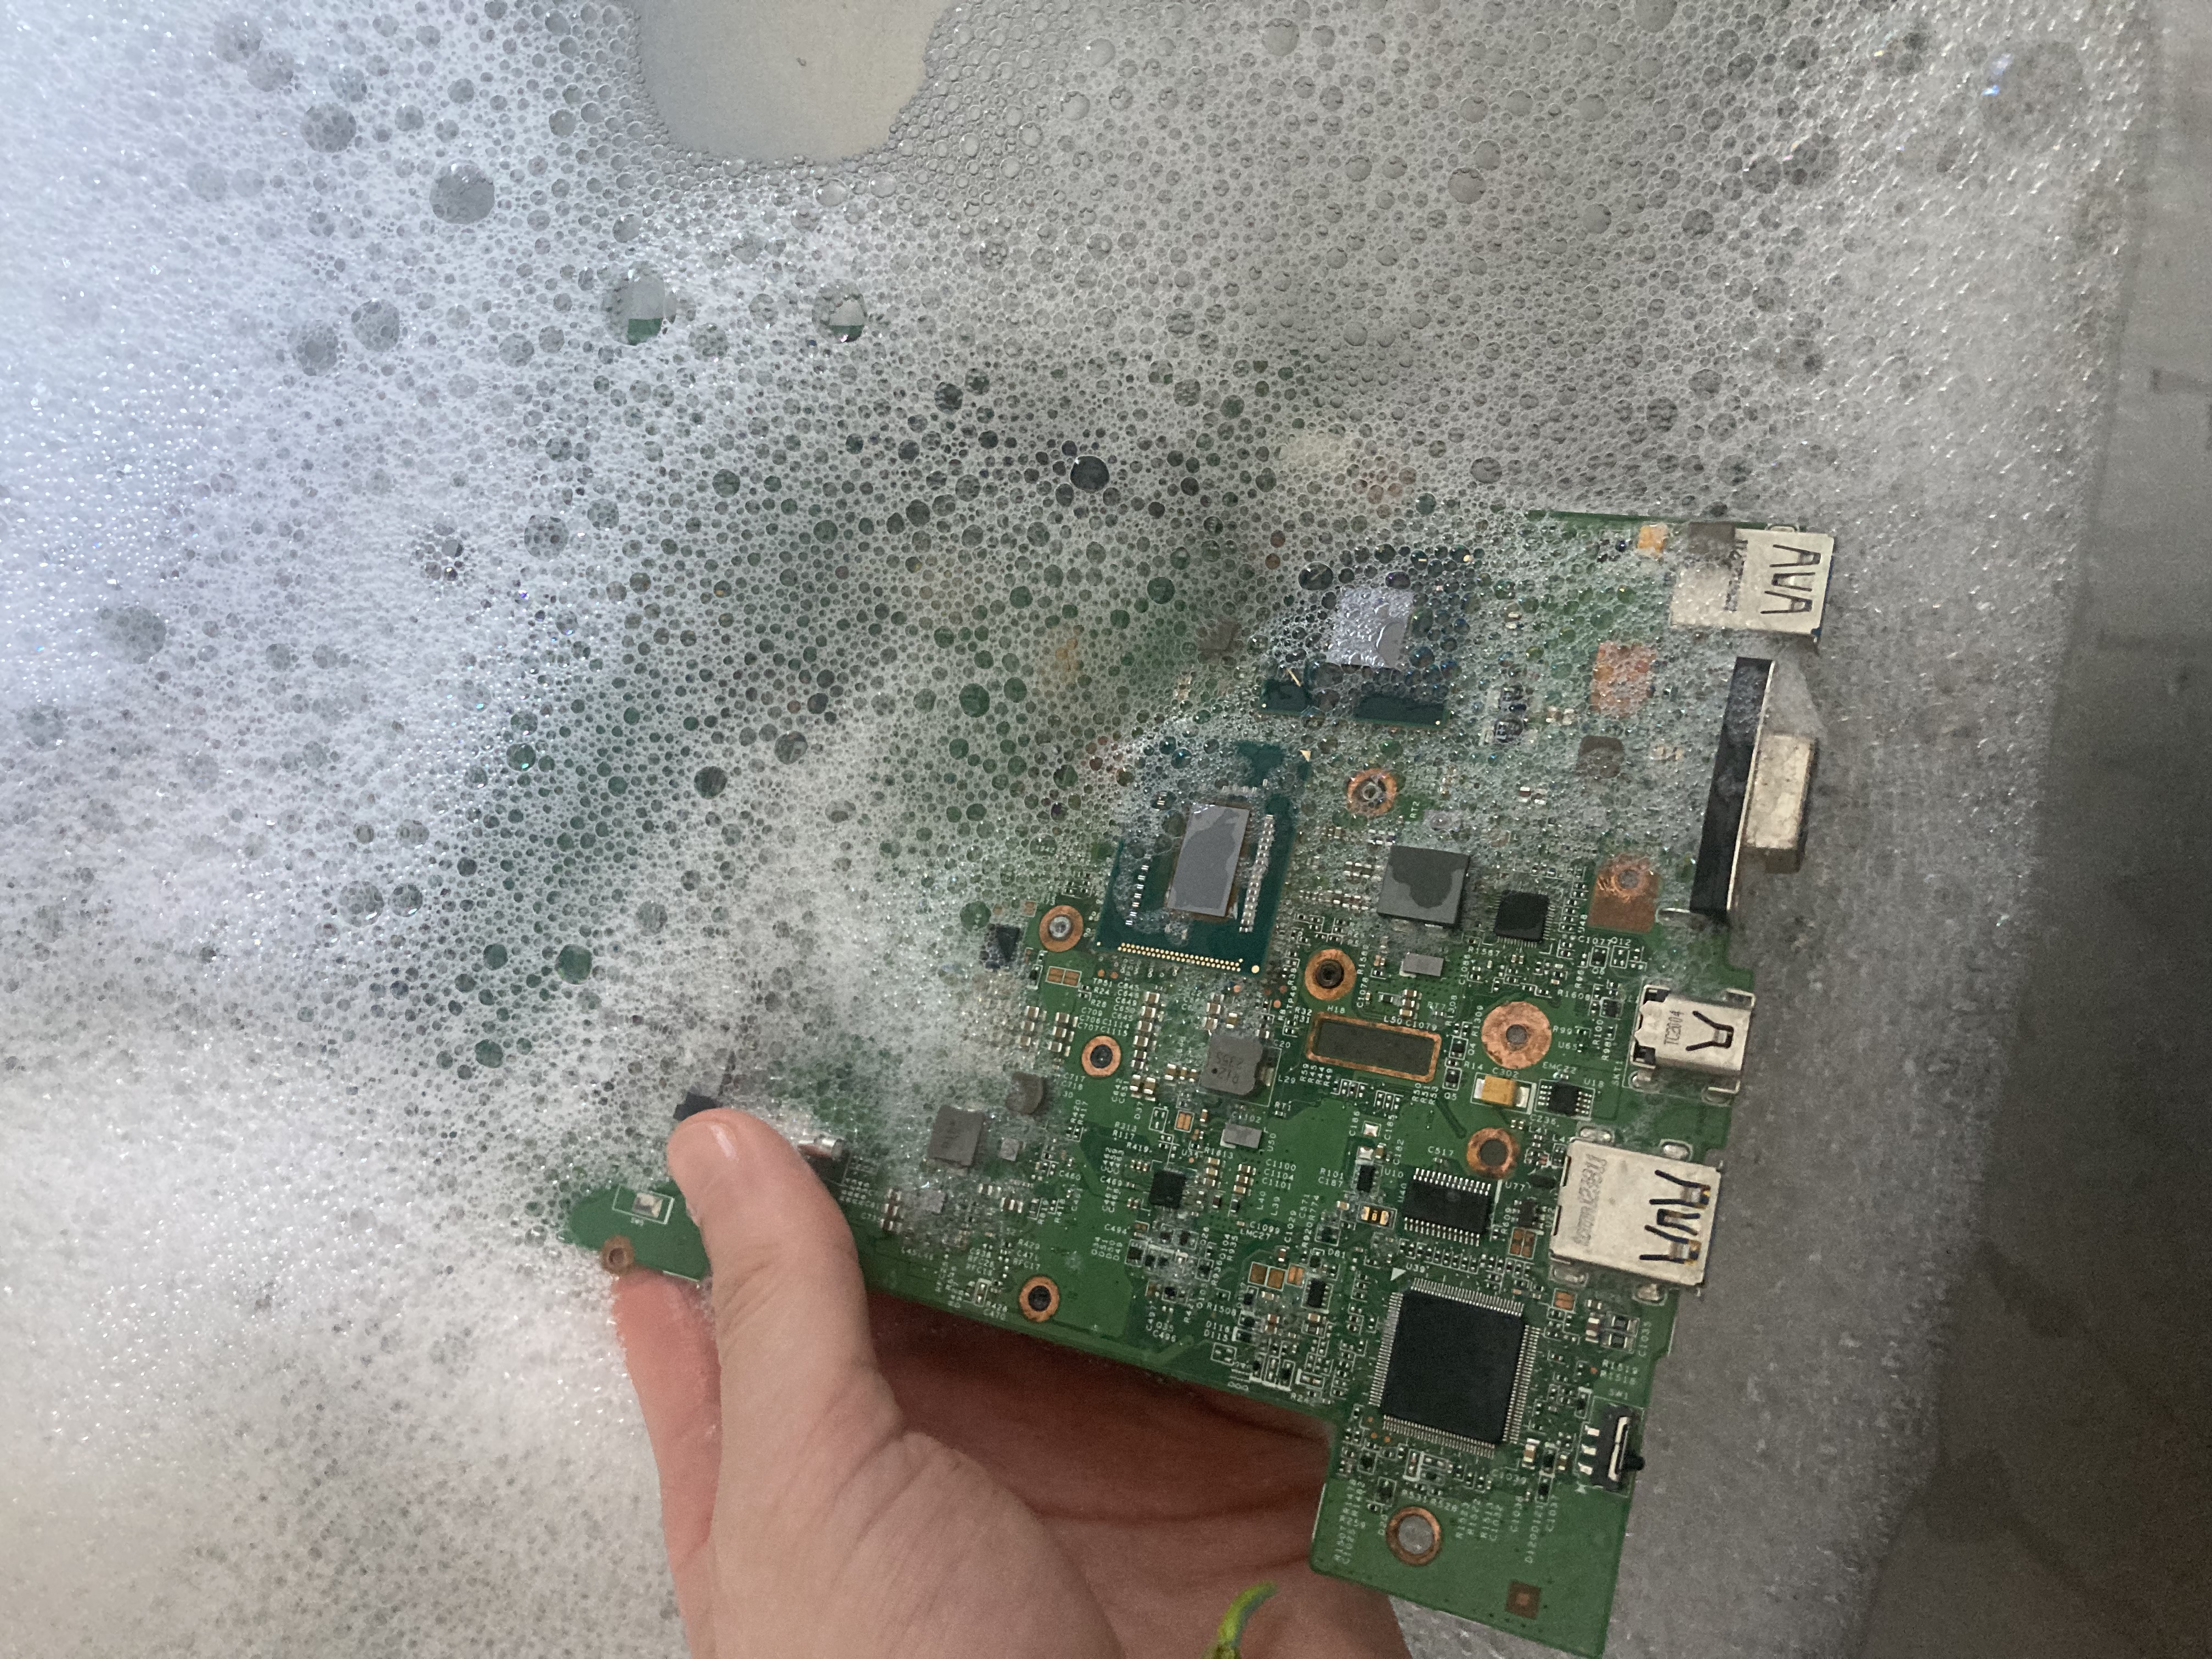 The mainboard of the thinkpad
x230 being dipped into a sink filled with soapy water